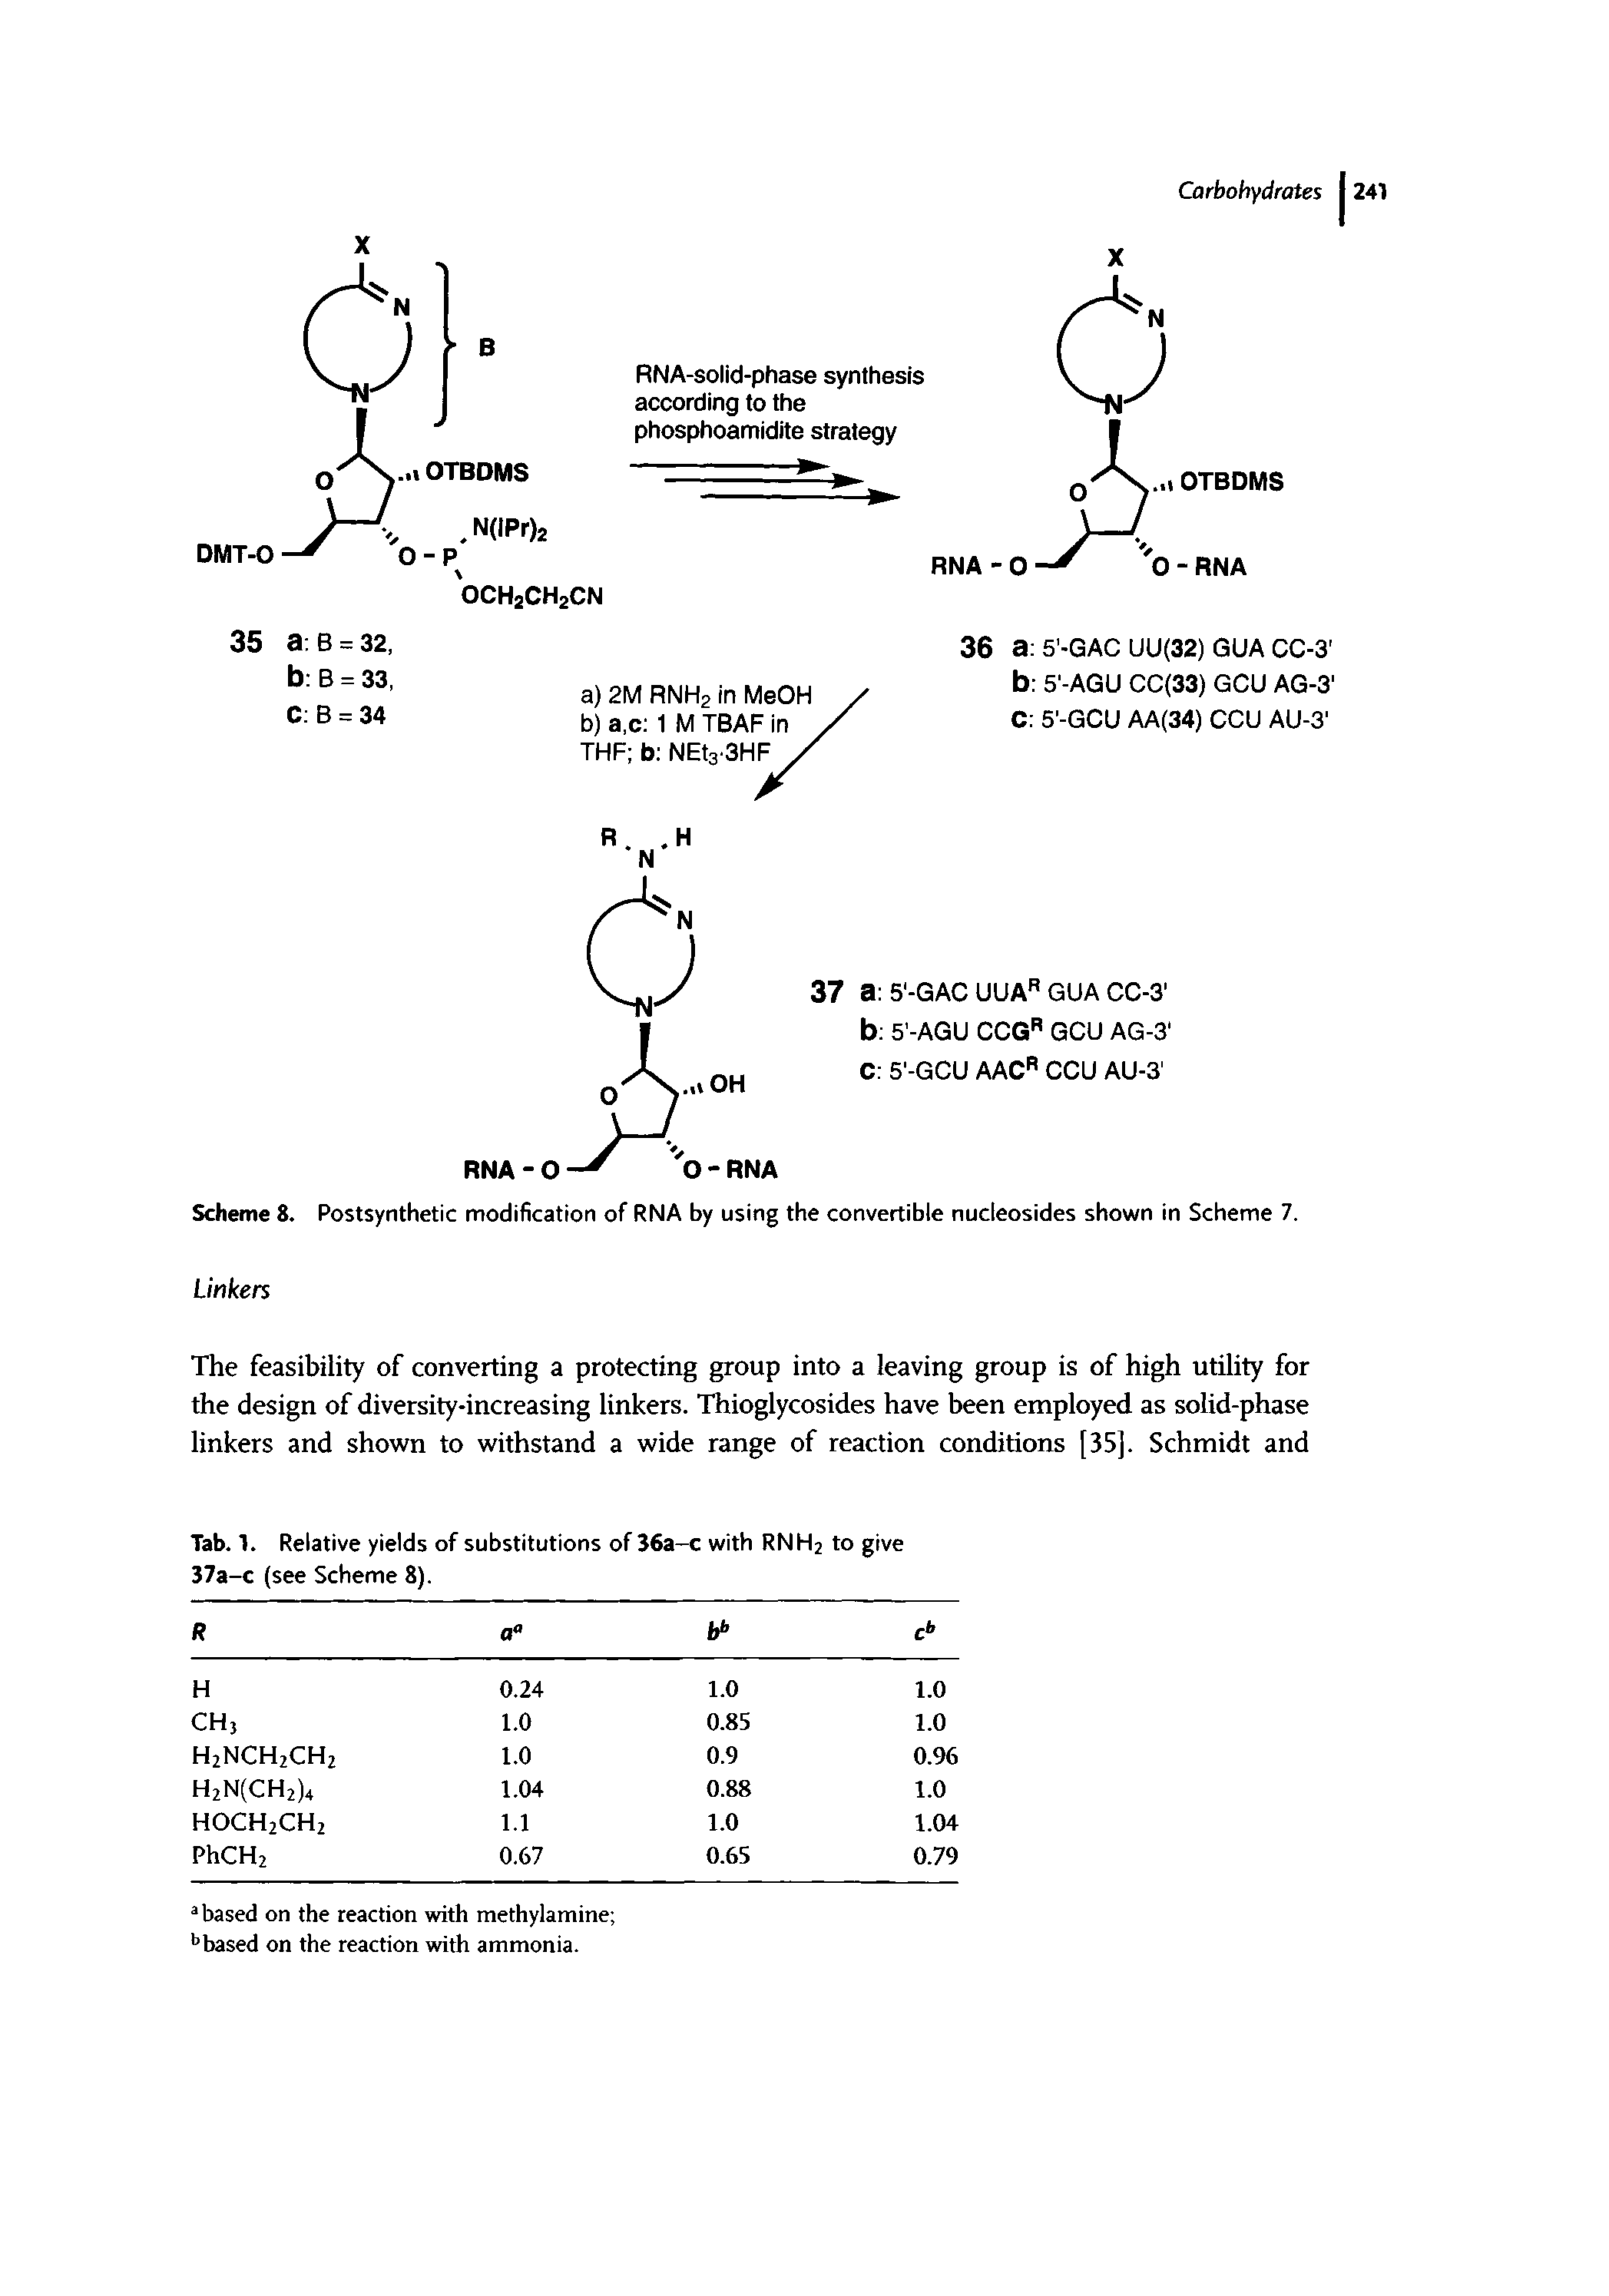 Scheme 8. Postsynthetic modification of RNA by using the convertible nucleosides shown in Scheme 7.